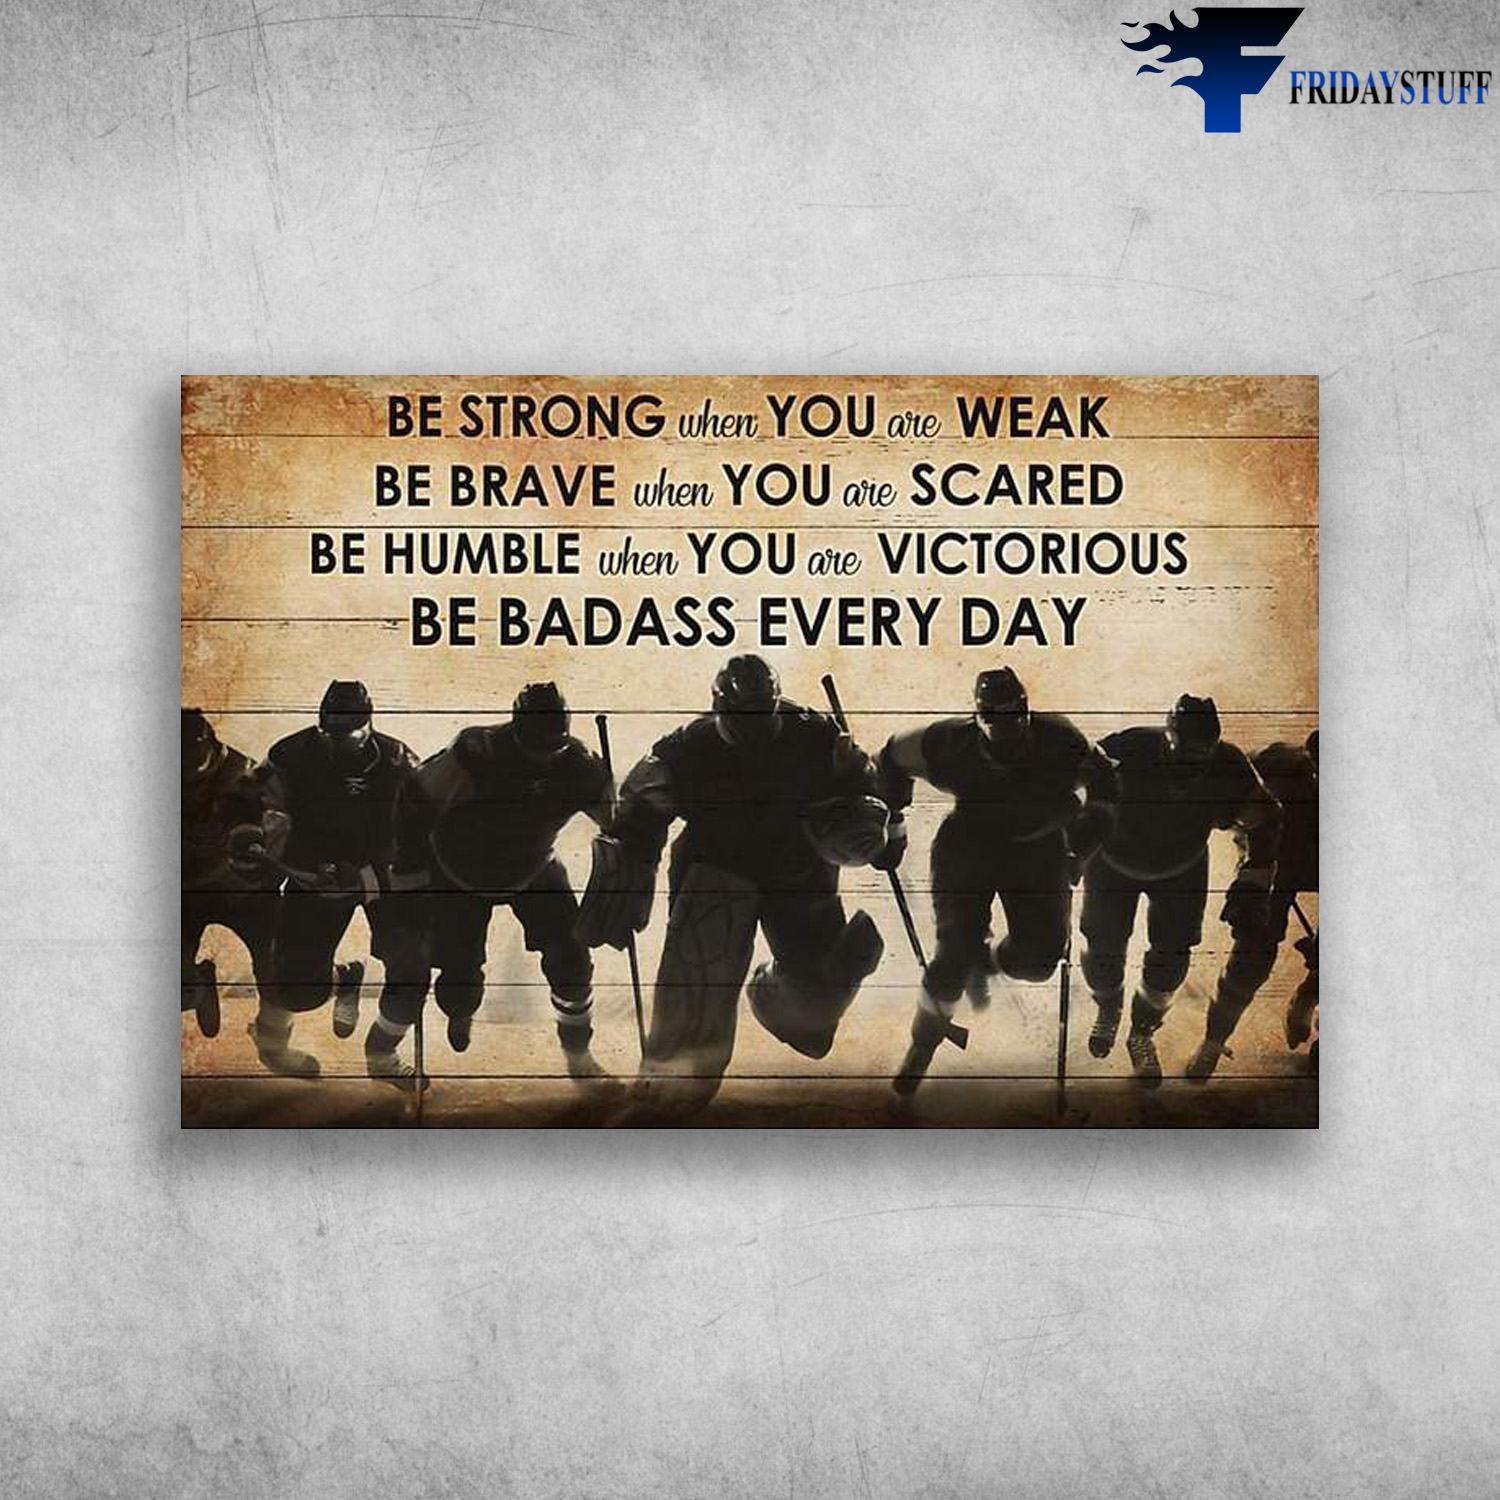 Hockey Players - Be Strong When You Are Weak, Be Brave When You Are Scared, Be Humble When You Are Victorious, Be Badass Everyday